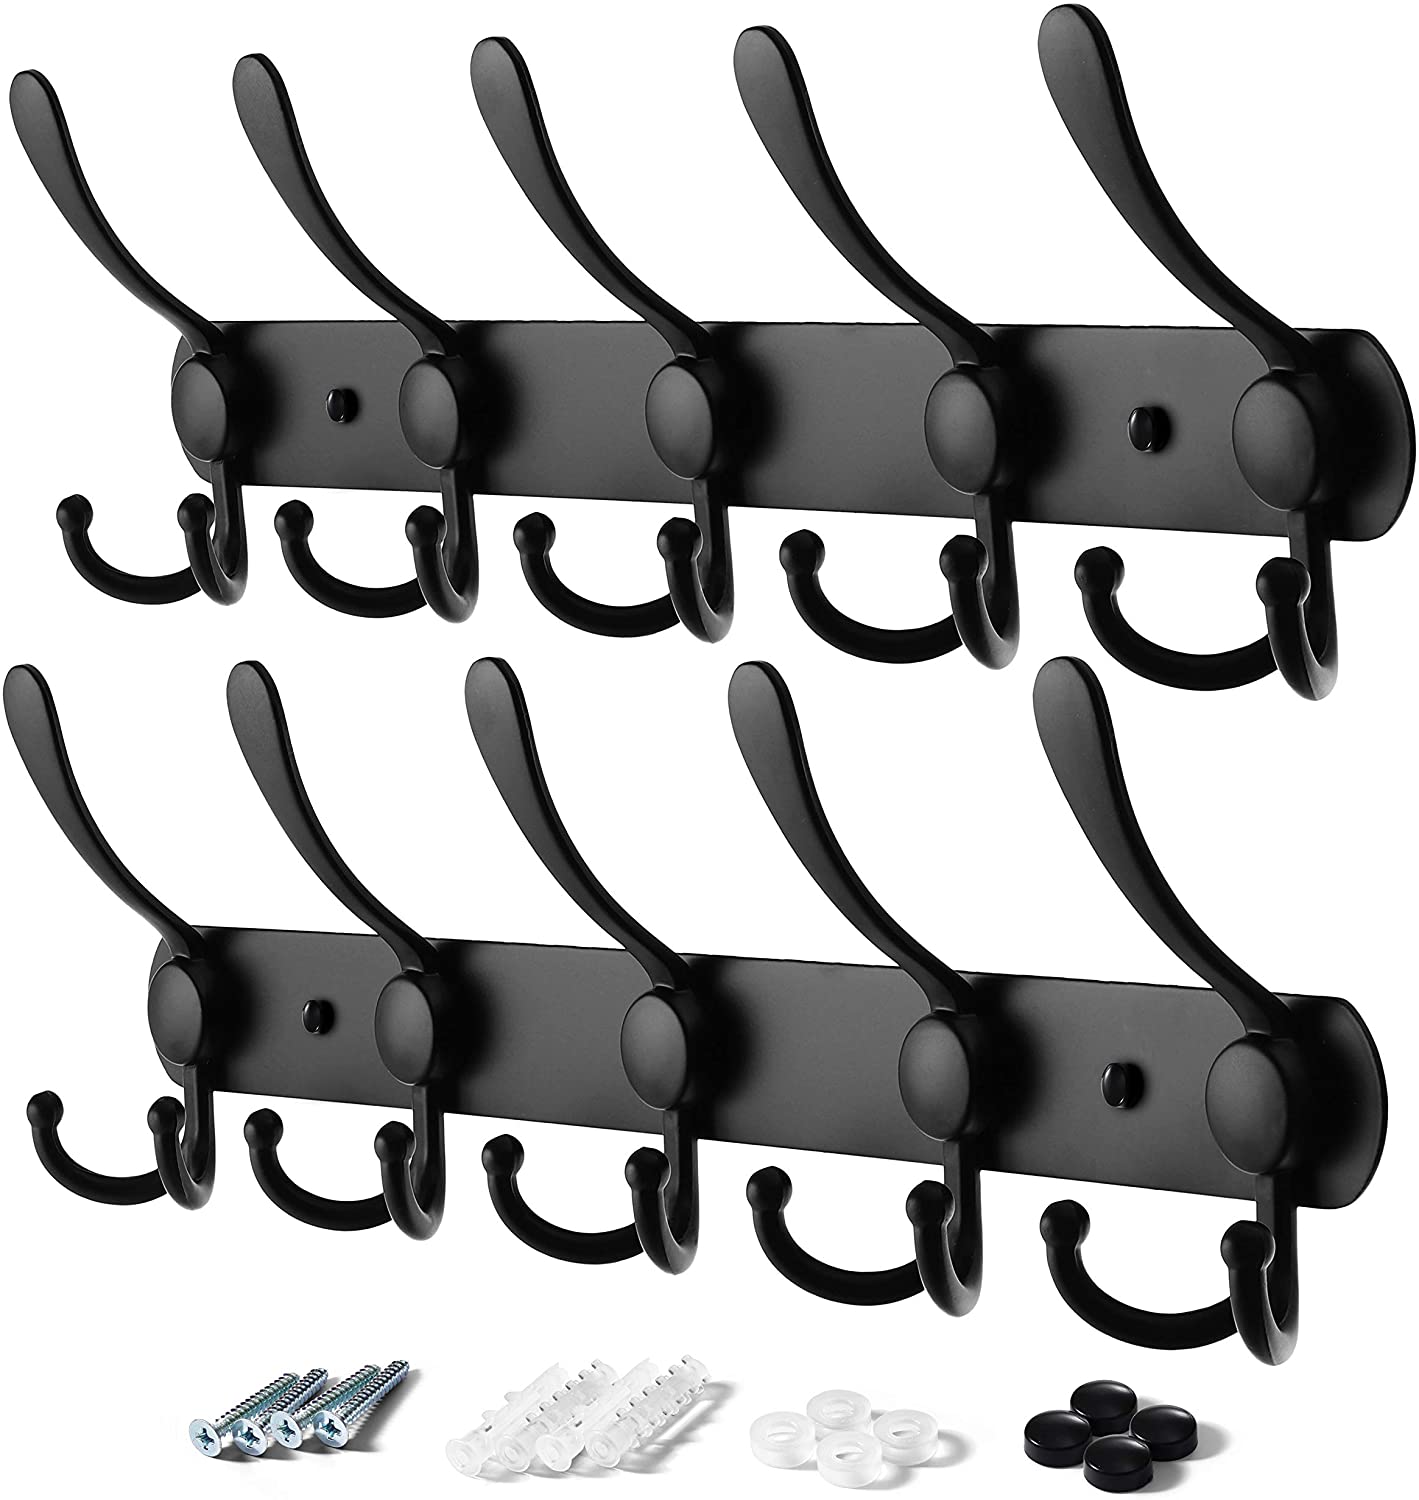 Coat Rack Wall Mount - 5 Tri Hooks,Stainless Steel Heavy Duty Coat Hat Hanger for Wall Organized and Storage,Black, 2 Packs